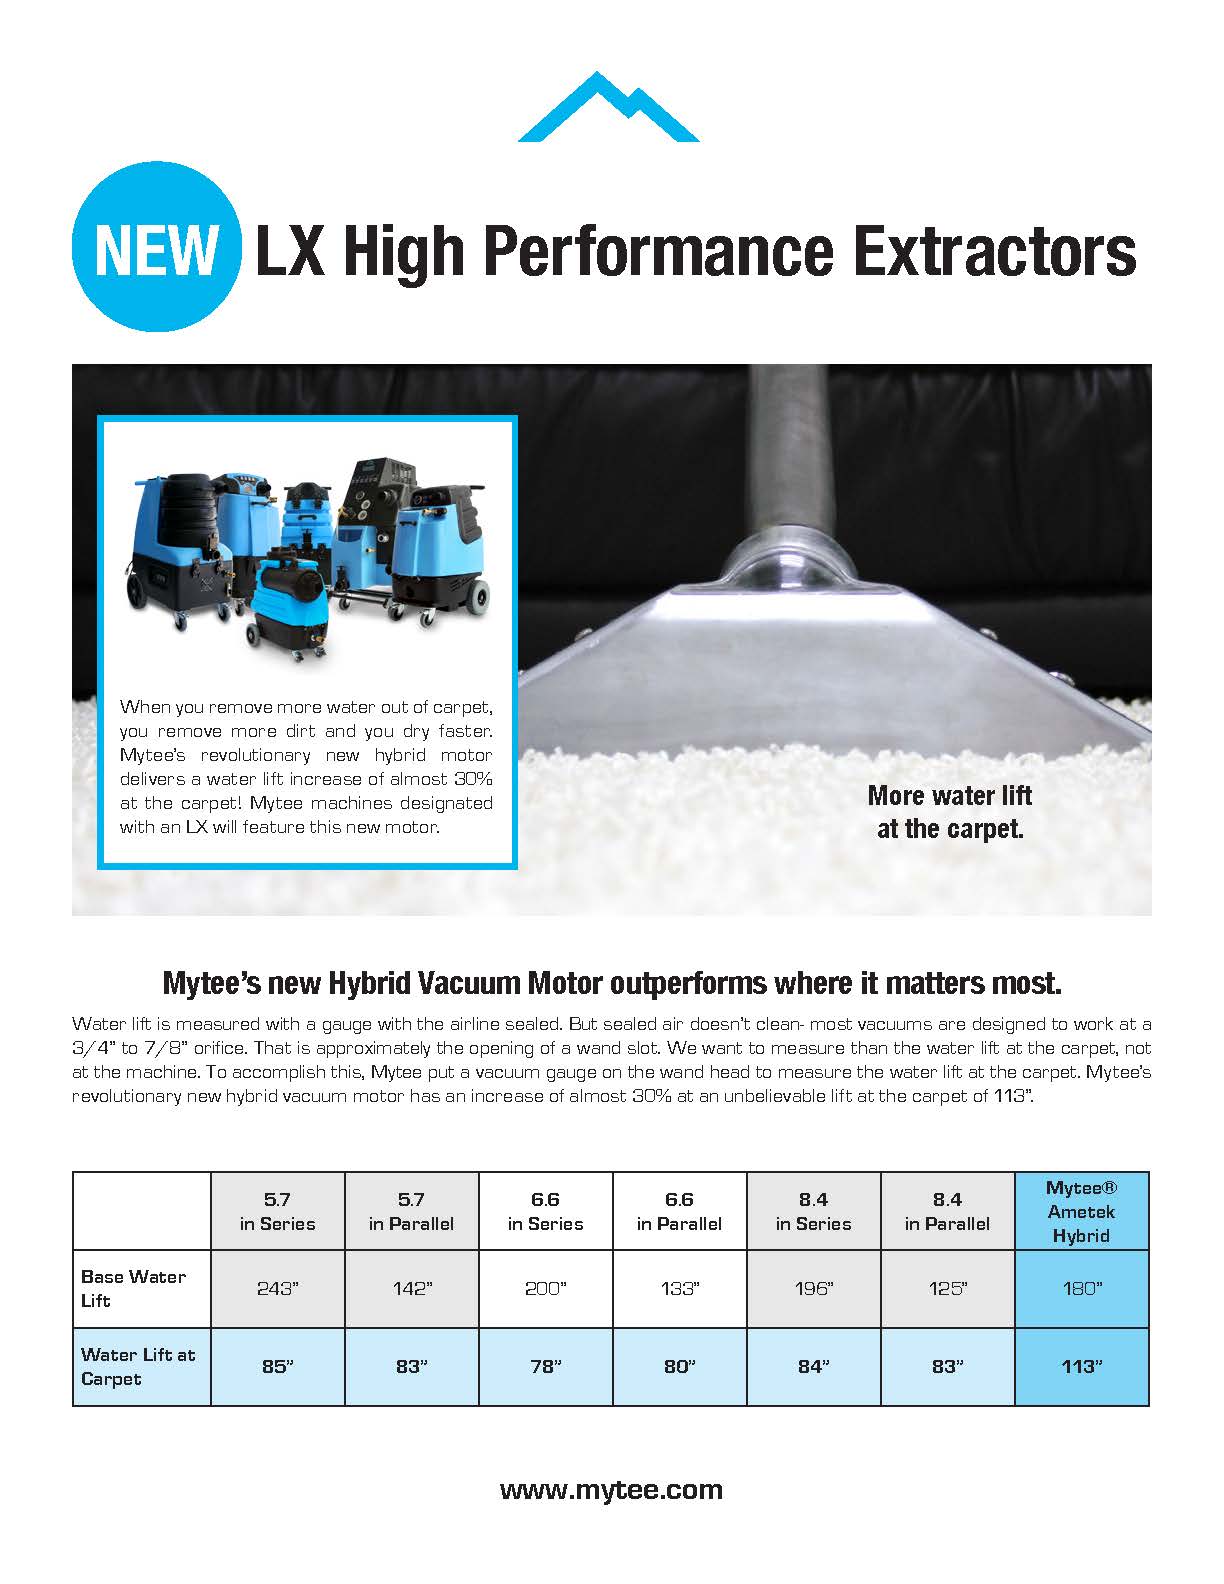 lx-extractors-combined-page-2.jpg